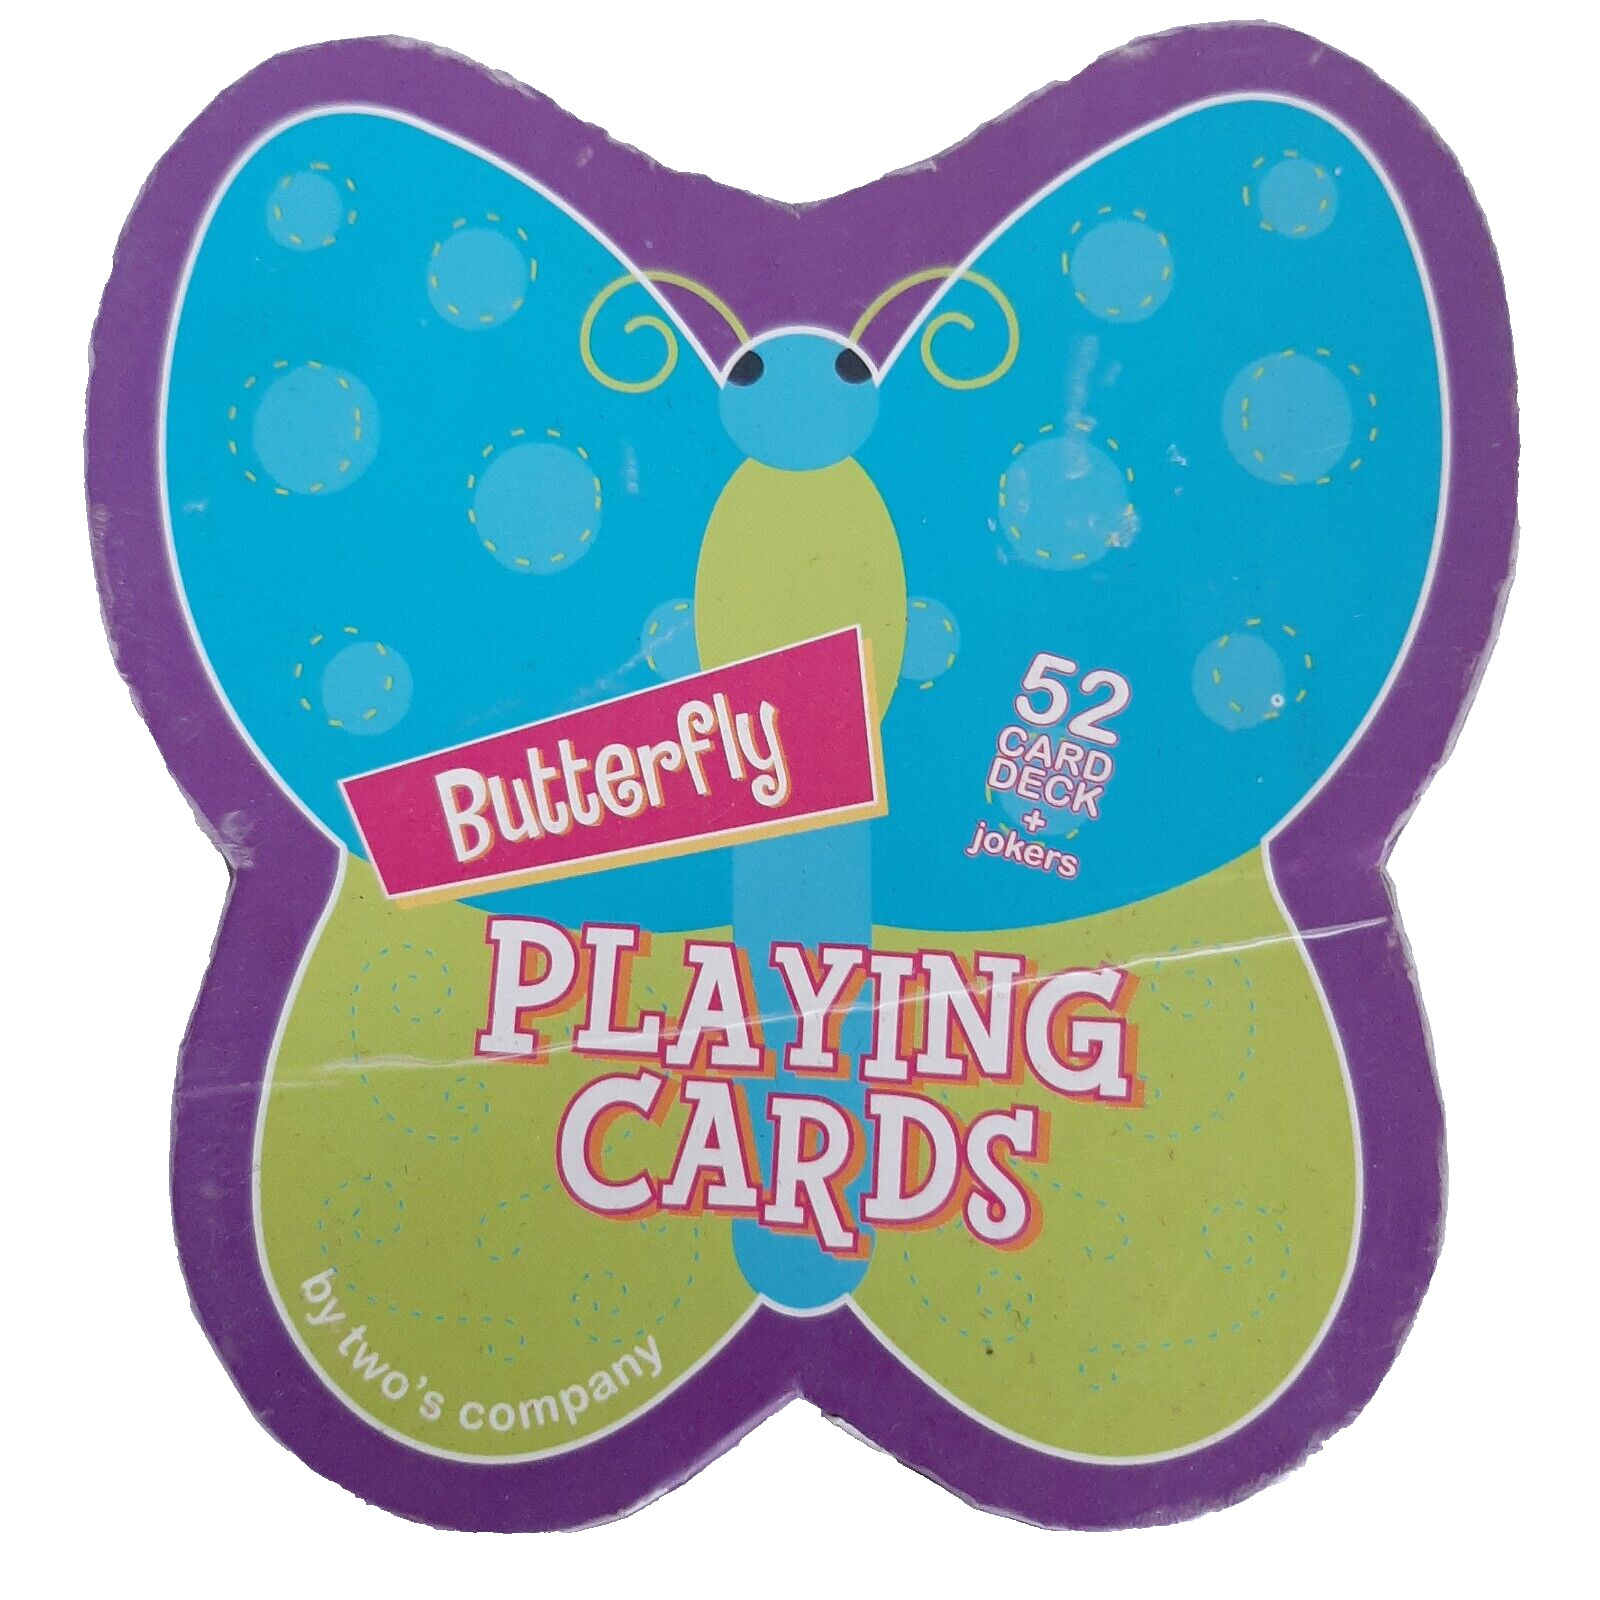 Two\'s Company Butterfly Shaped Playing Card Deck 52 Cards Plus Jokers in Box